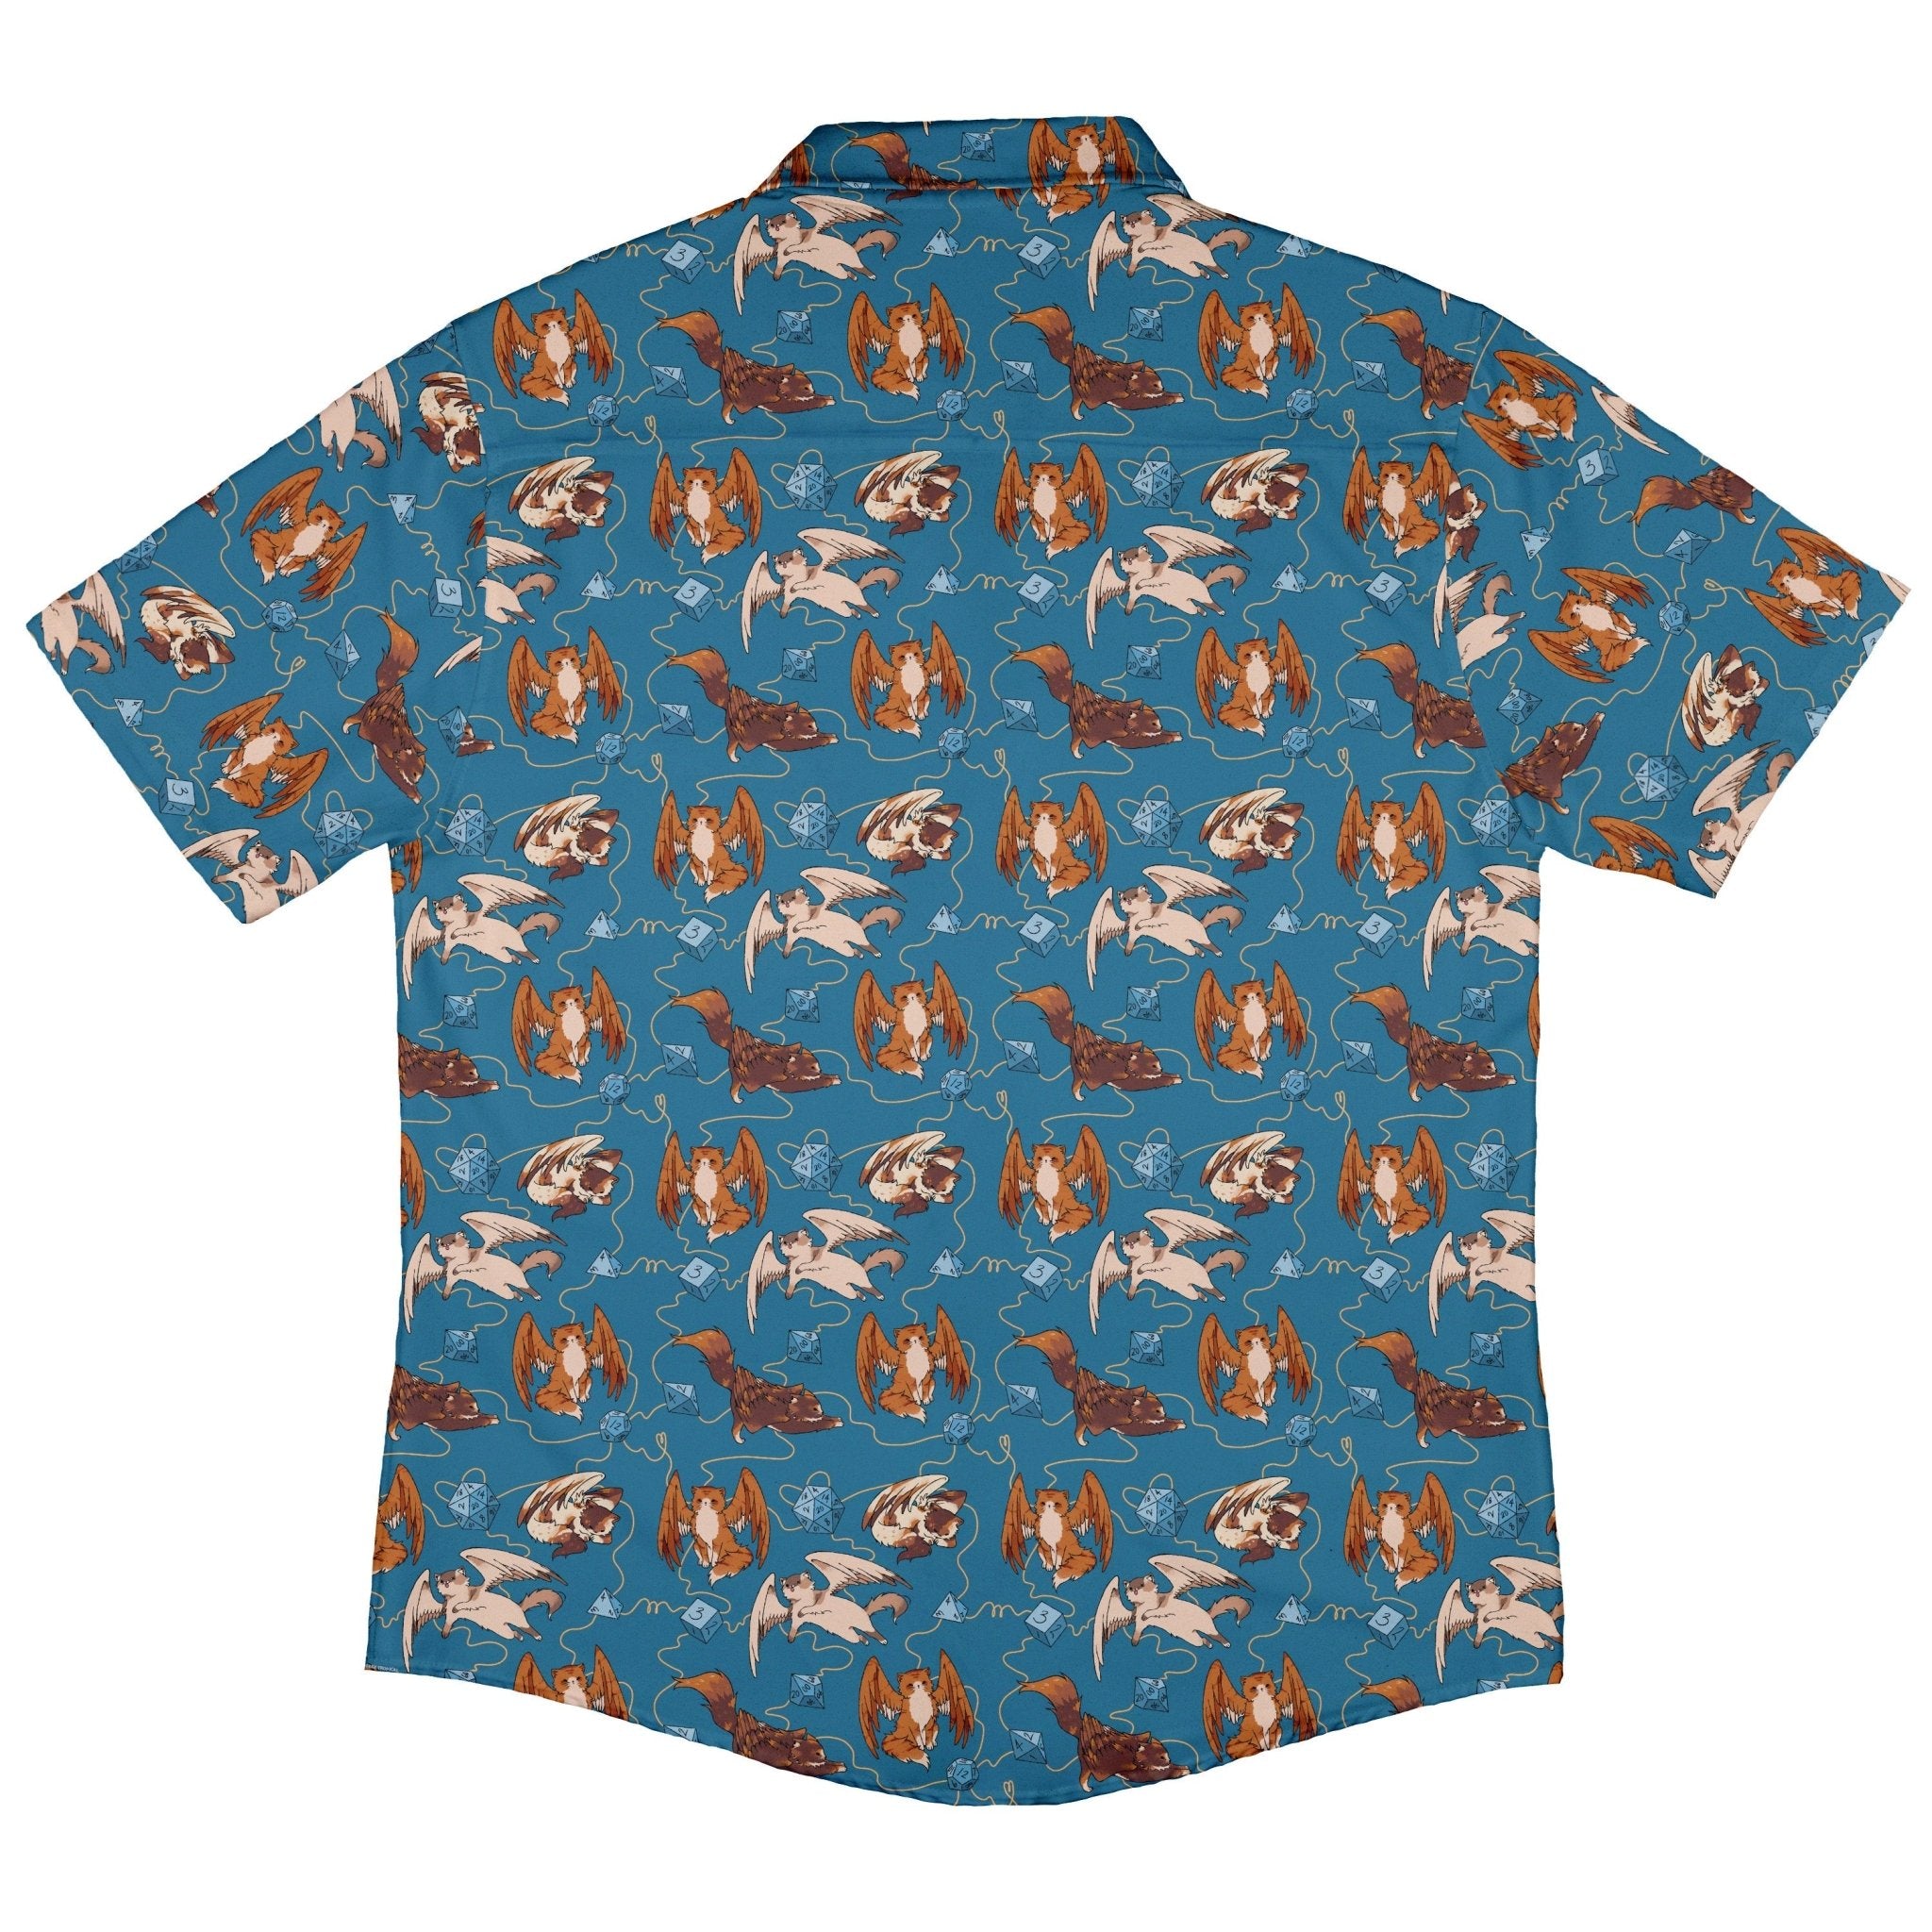 Dnd Tressym Familiars Button Up Shirt - adult sizing - Design by Ardi Tong - dnd & rpg print